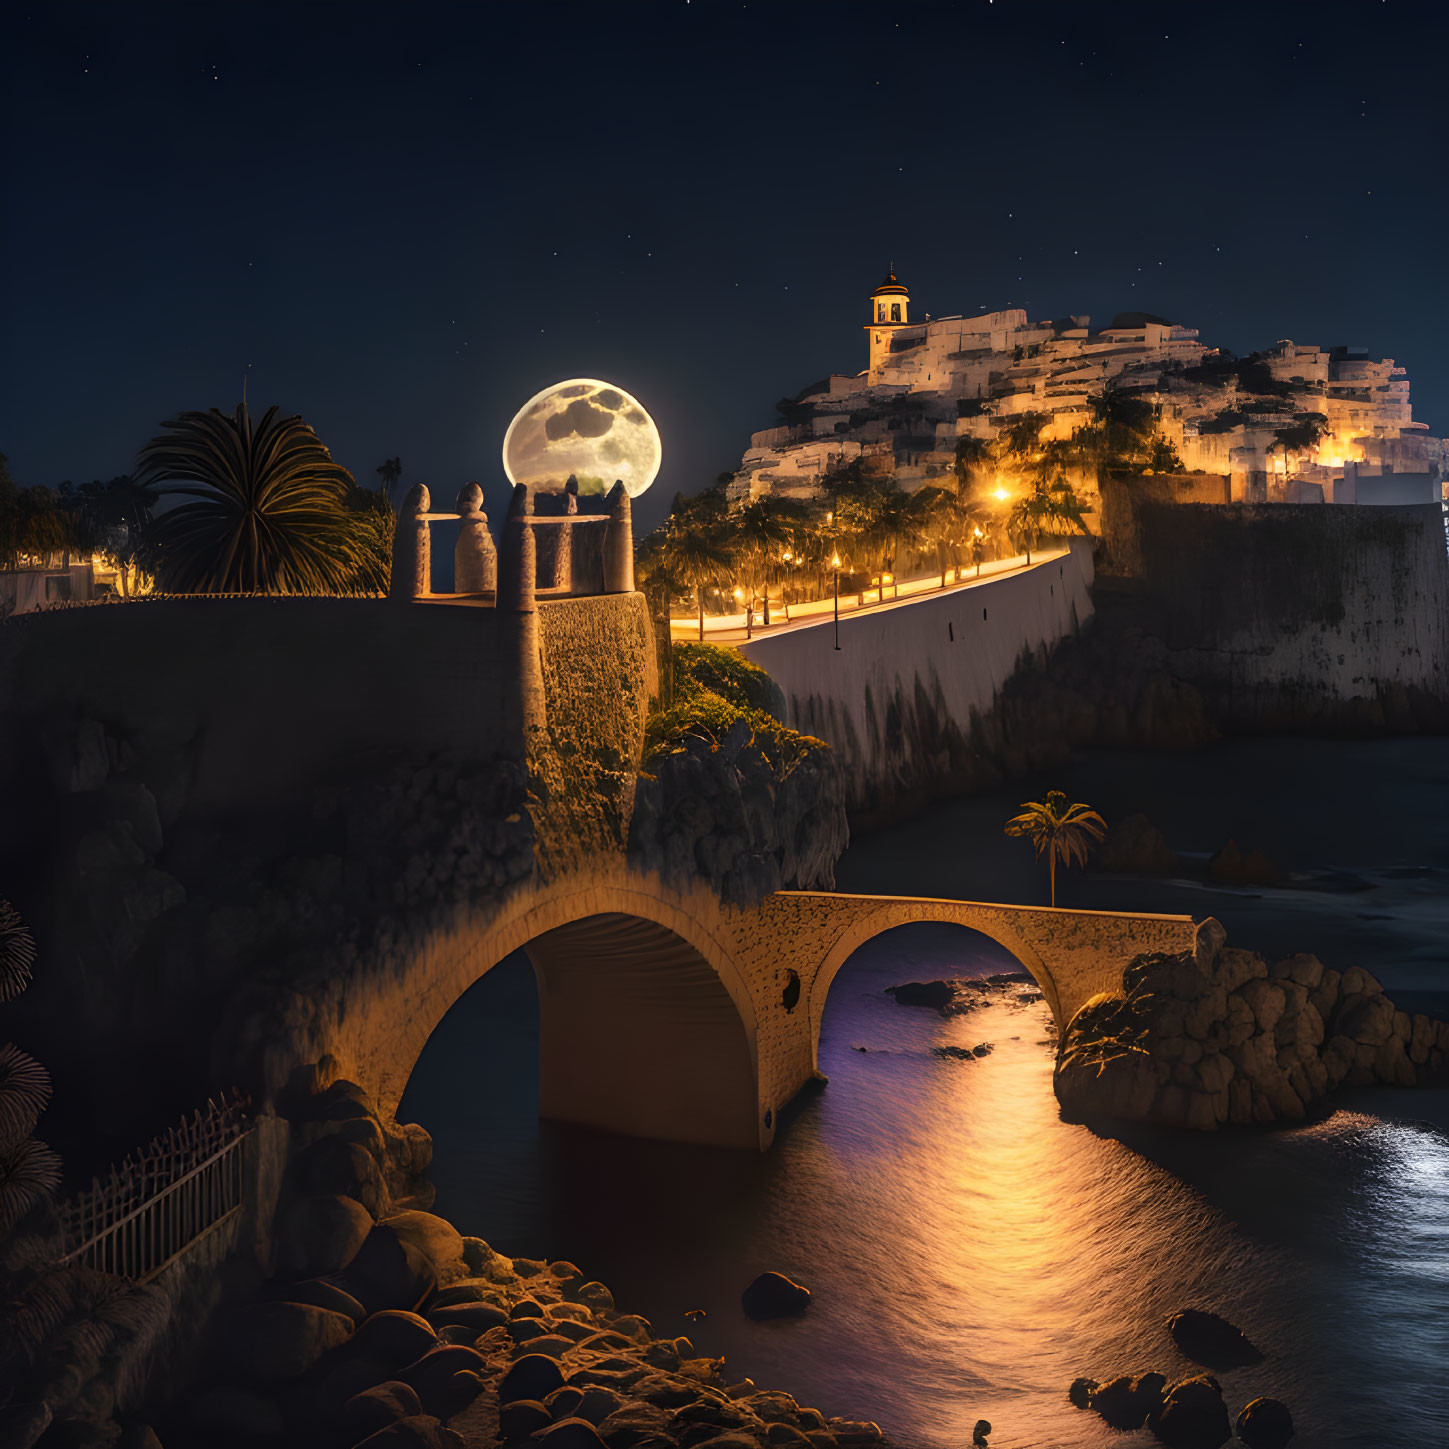 Illuminated Bridge with Arches Leading to Hilltop Village at Night